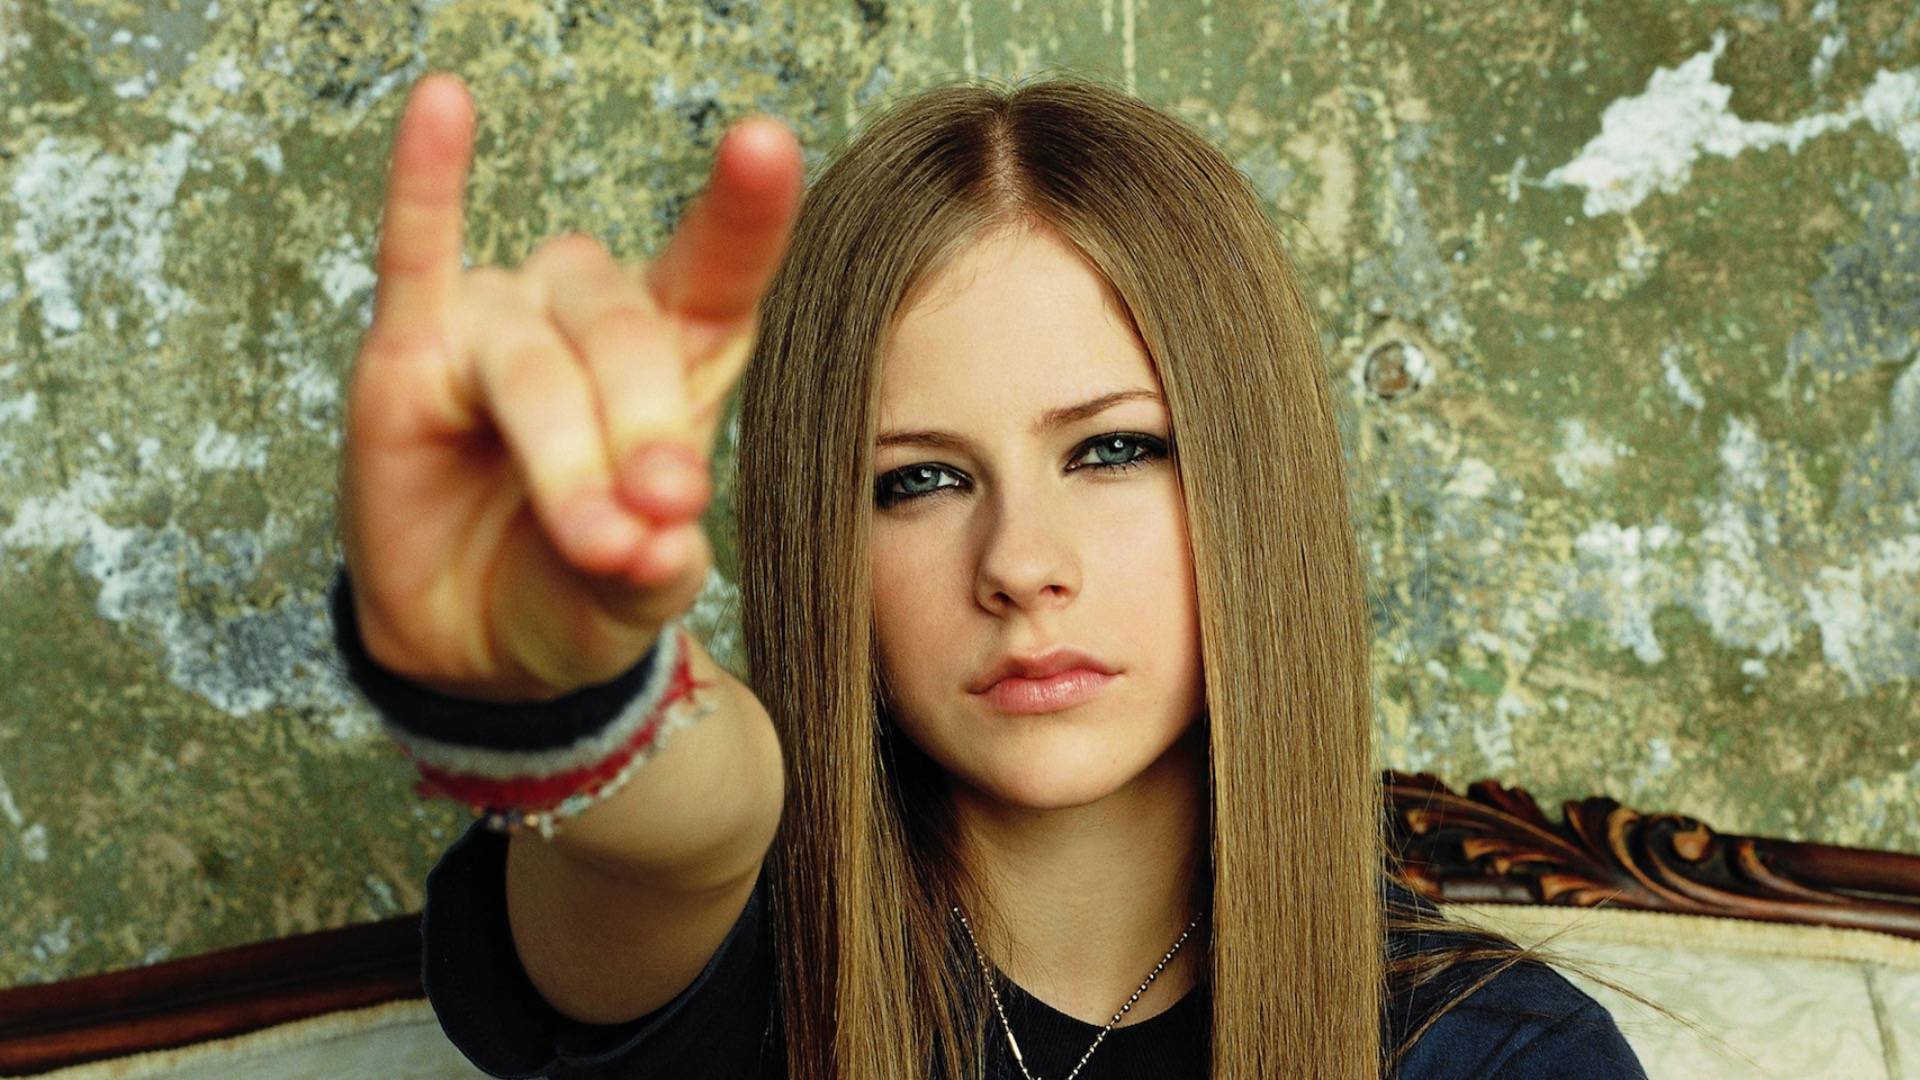 Teenage Avril Lavigne in early 2000s looking to camera and making hand gesture 